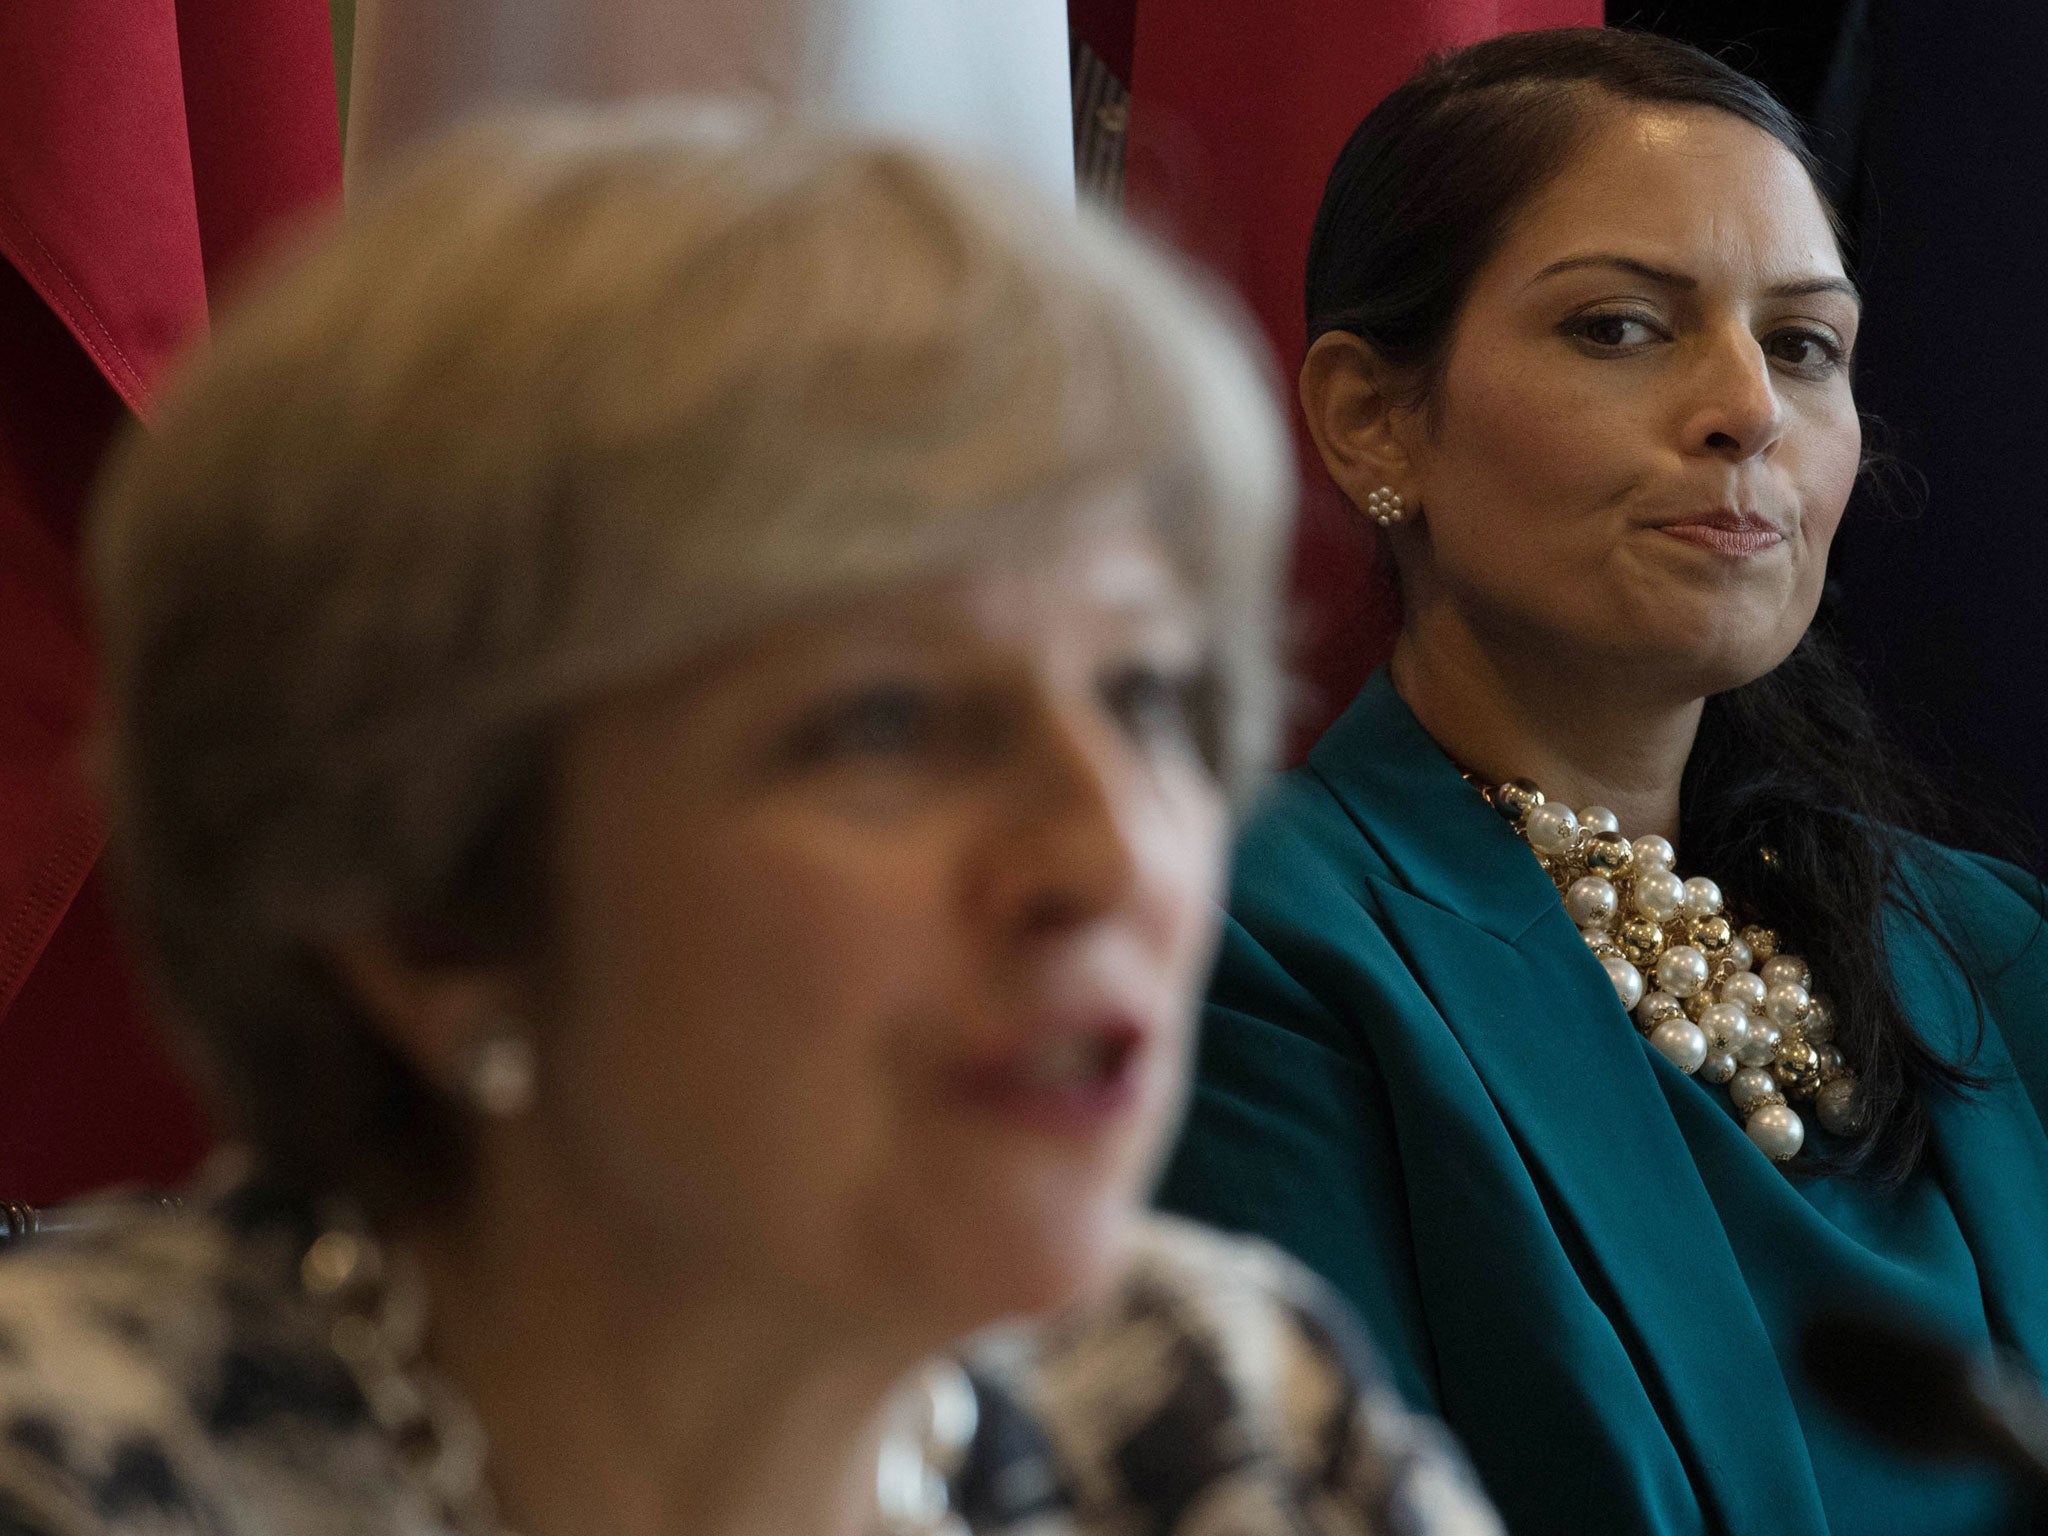 Priti Patel has complained to the Electoral Commission over the Remain campaign